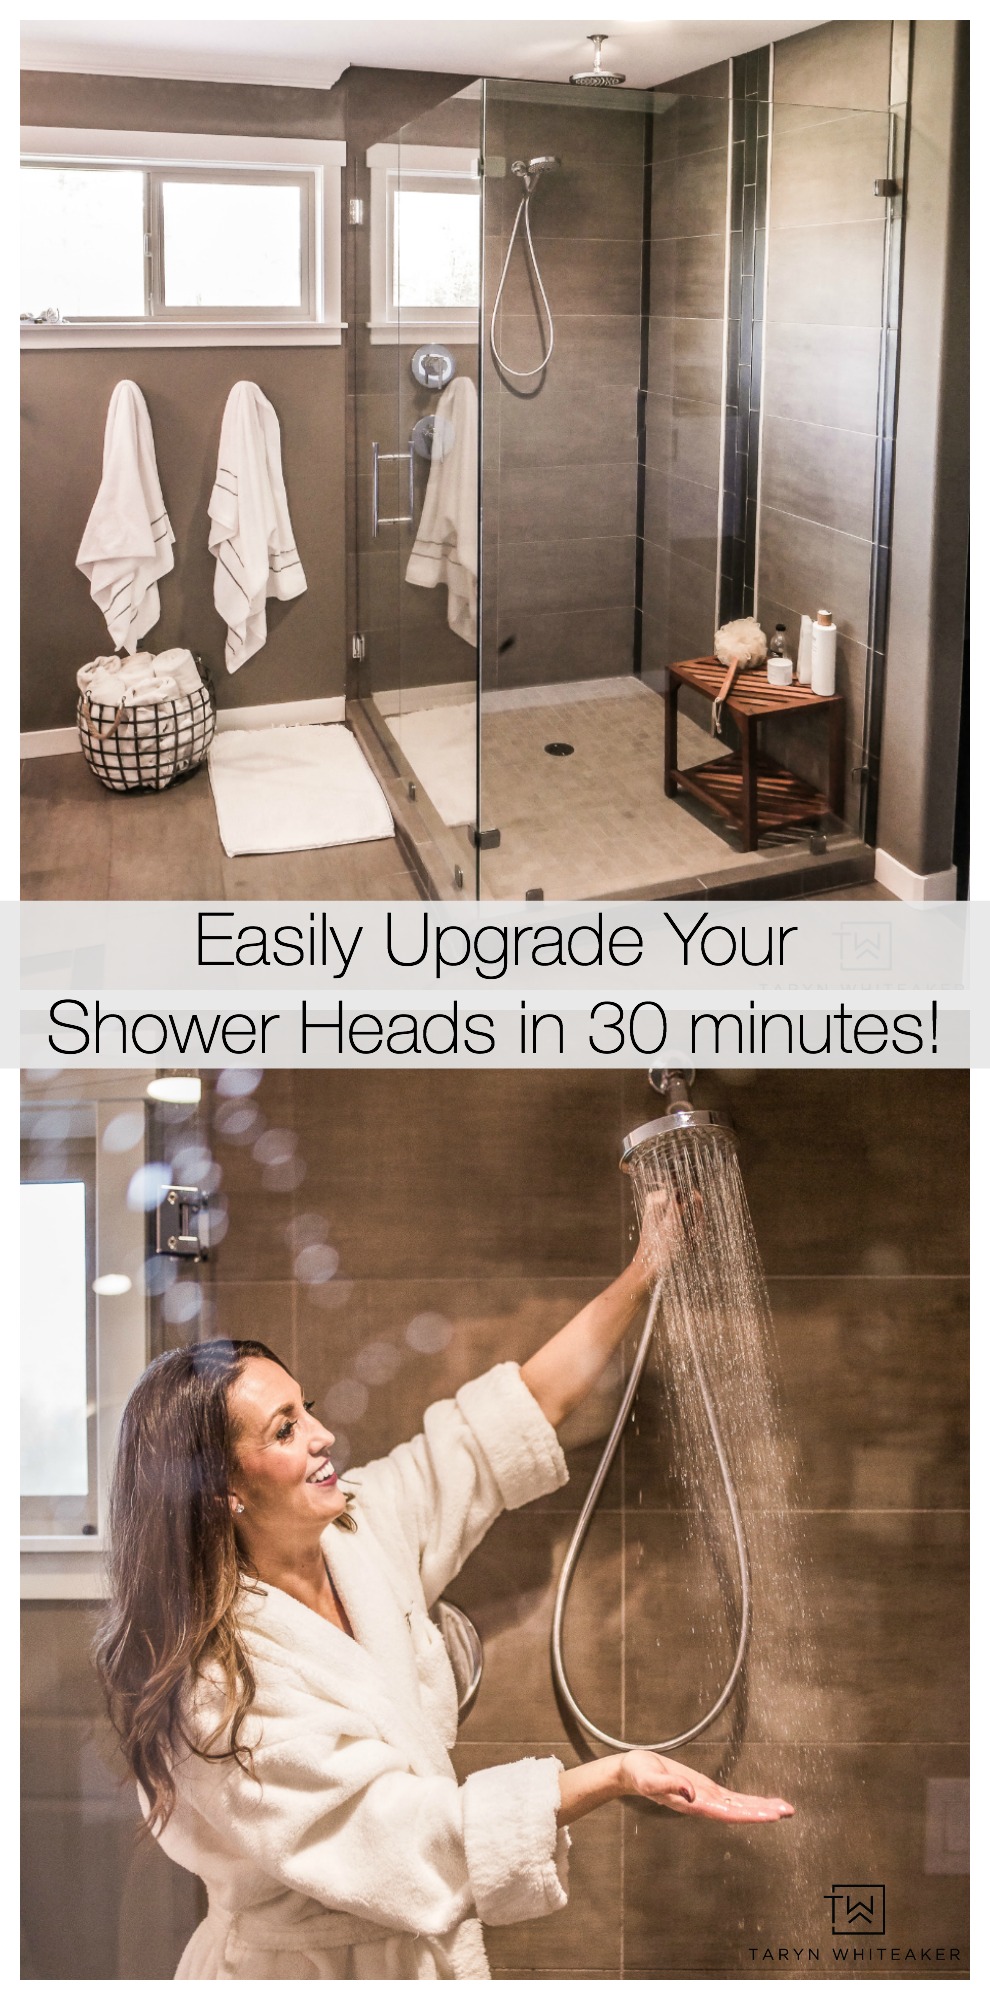 Upgrade your Shower Heads in just 30 minutes with these Hansgohe PowderRain Technology Products! AD